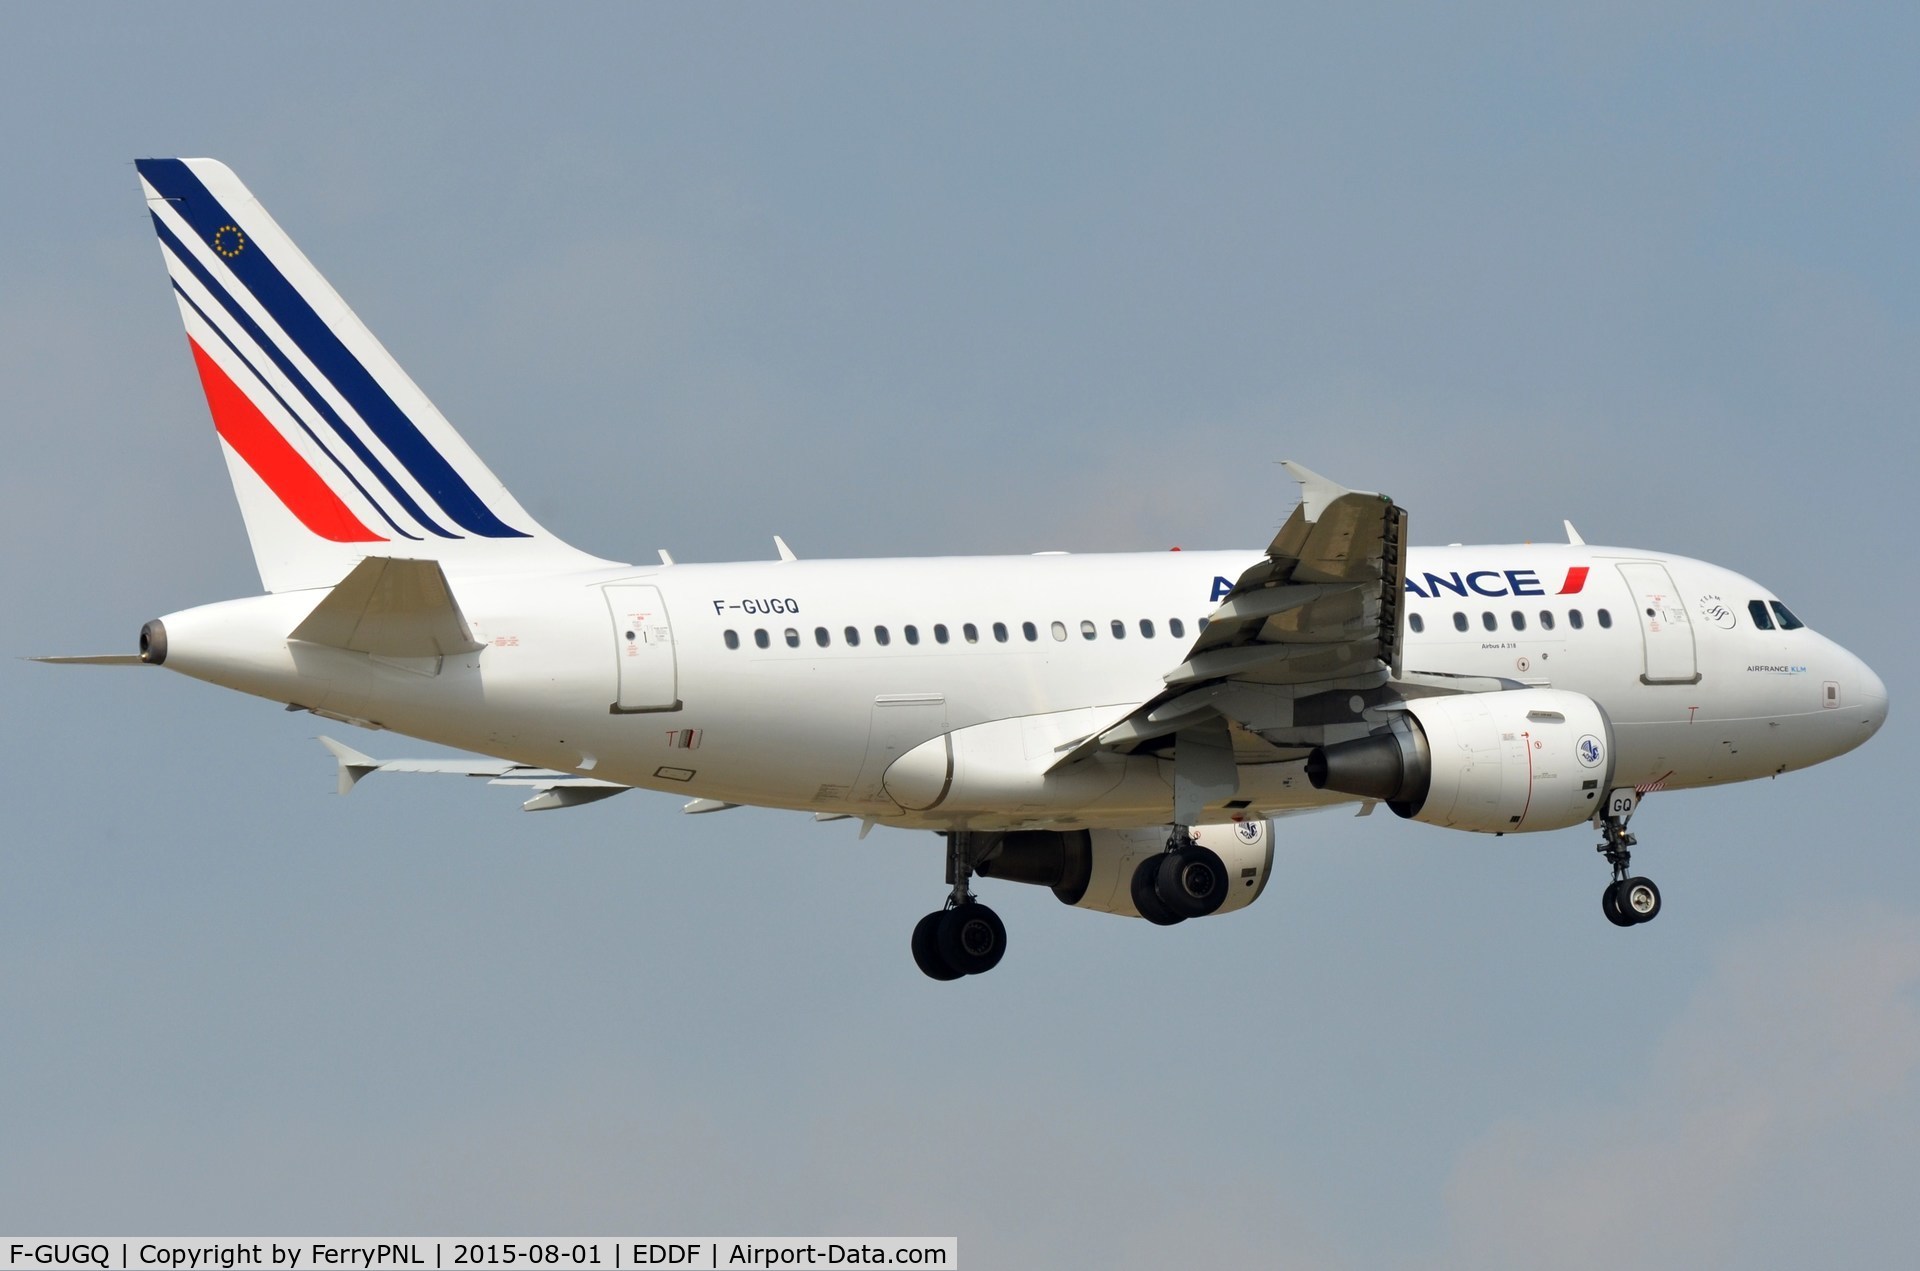 F-GUGQ, 2006 Airbus A318-111 C/N 2972, Air France A318 landing in FRA